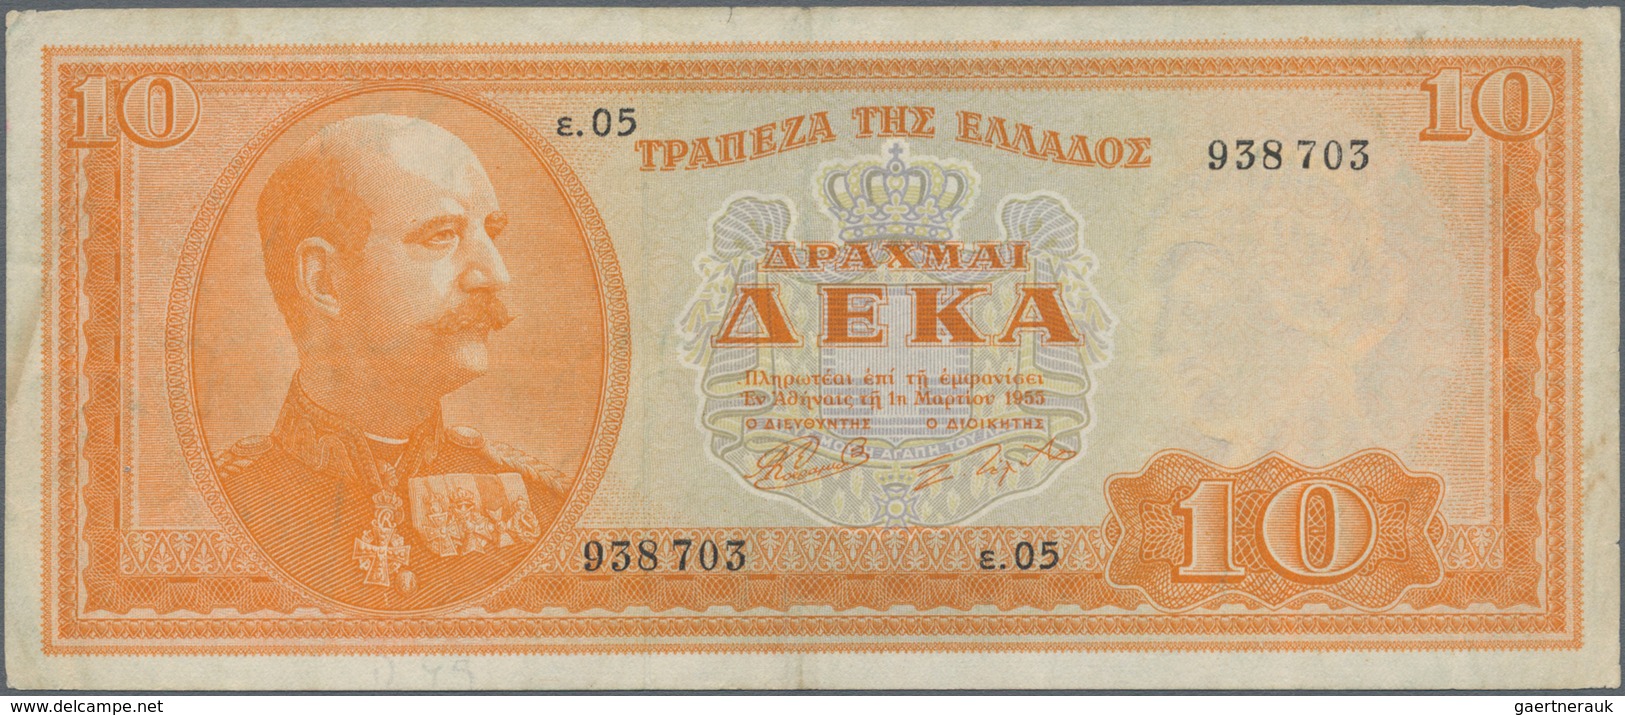 Greece / Griechenland: Set with 4 banknotes comprising 1000 Drachmai ND(1944) P.172 (XF), 20.000 Dra